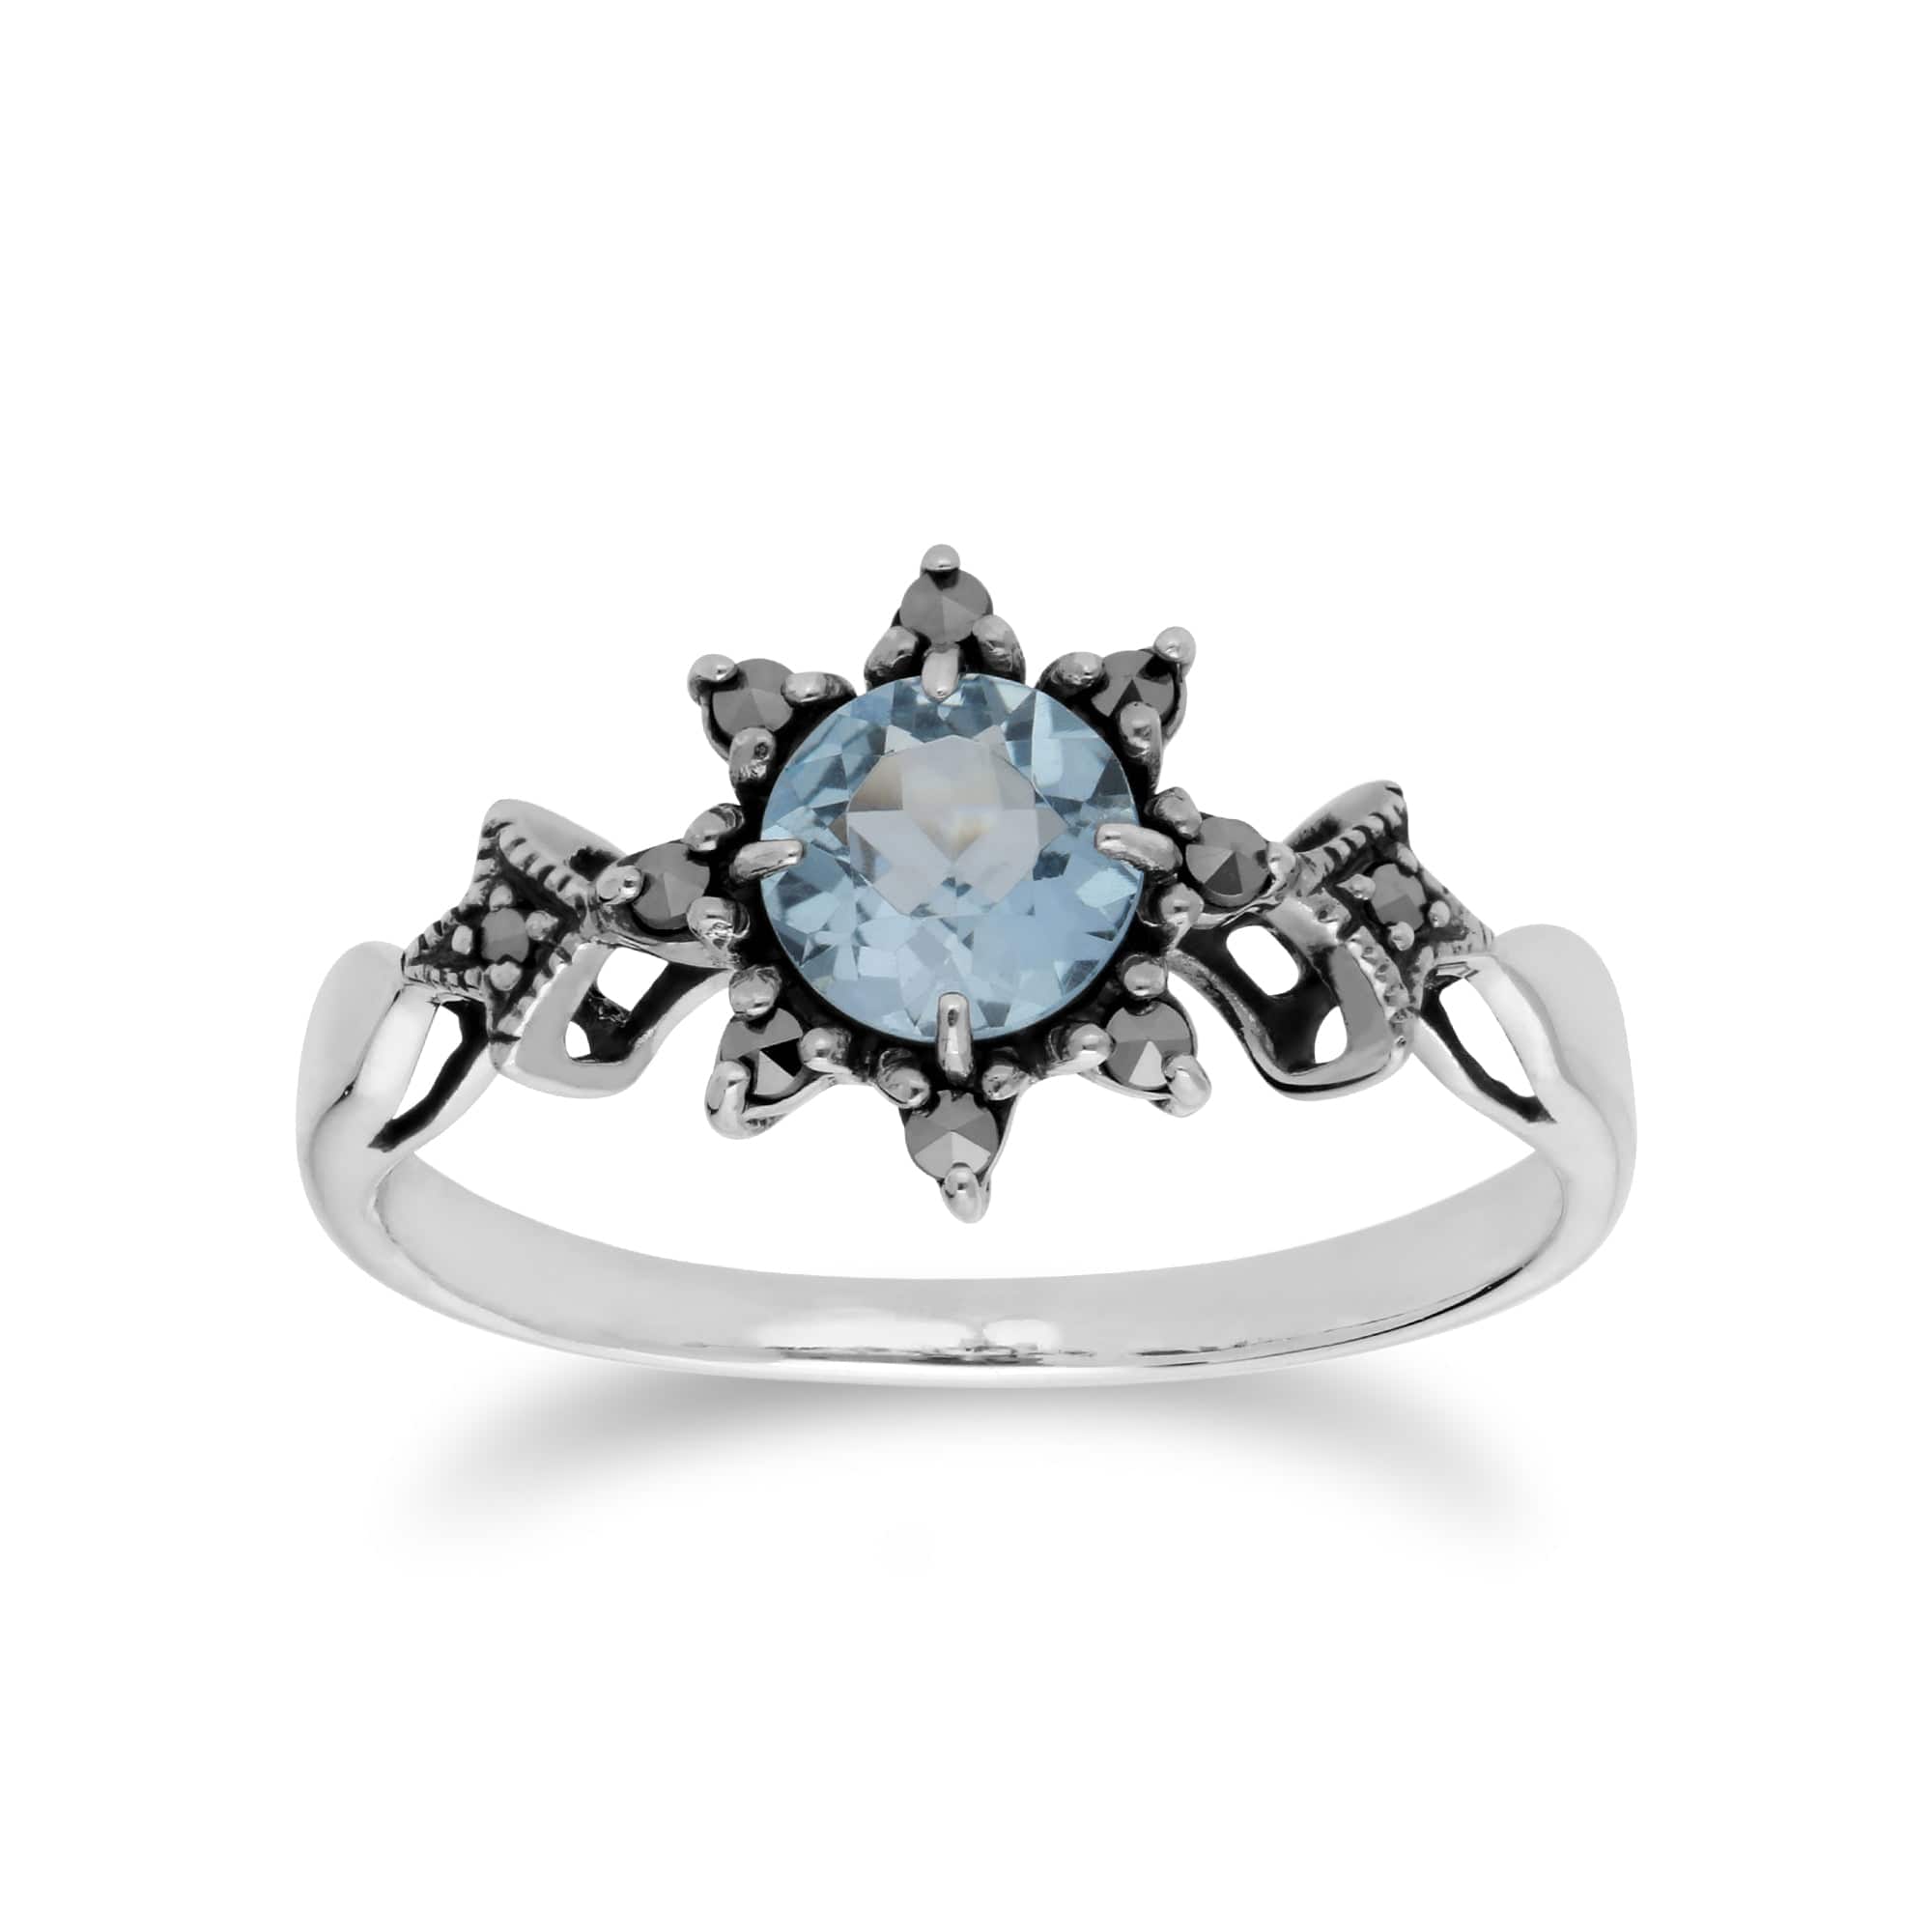 214R599501925 Art Deco Style Round Blue Topaz & Marcasite Floral Ring in 925 Sterling Silver 1